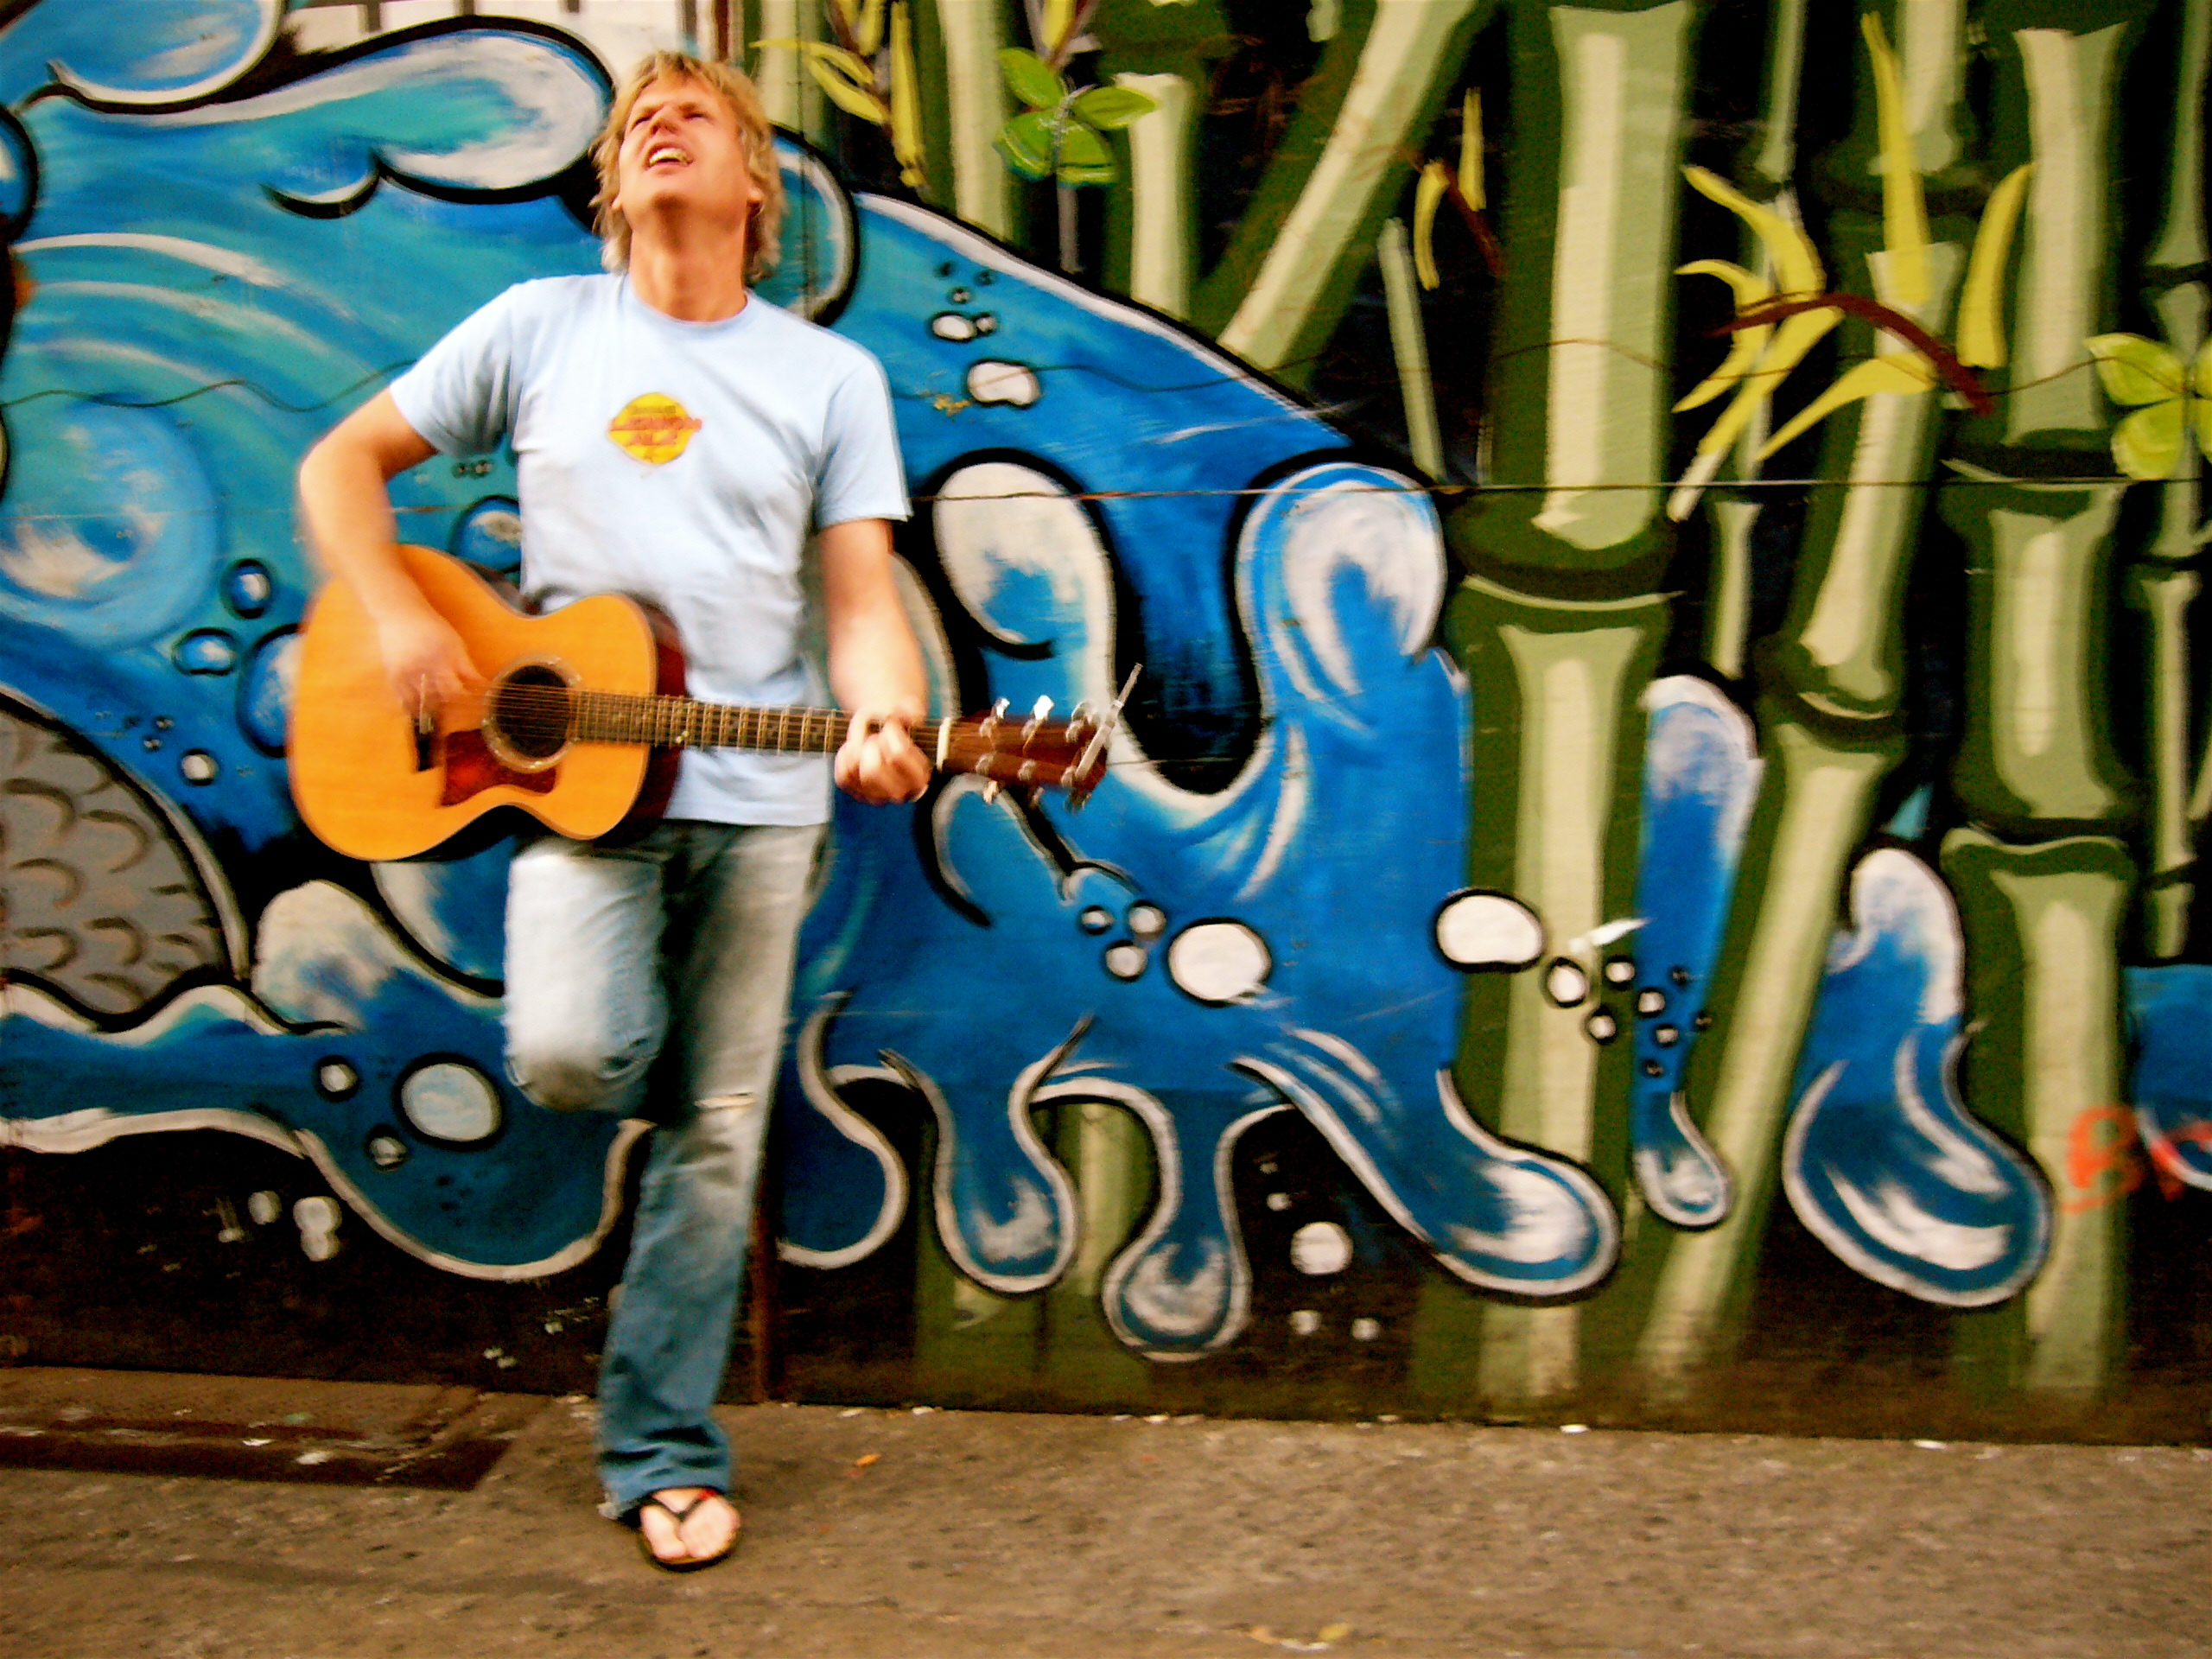 Mike Weterings. Songwriner and musician from Vancouver